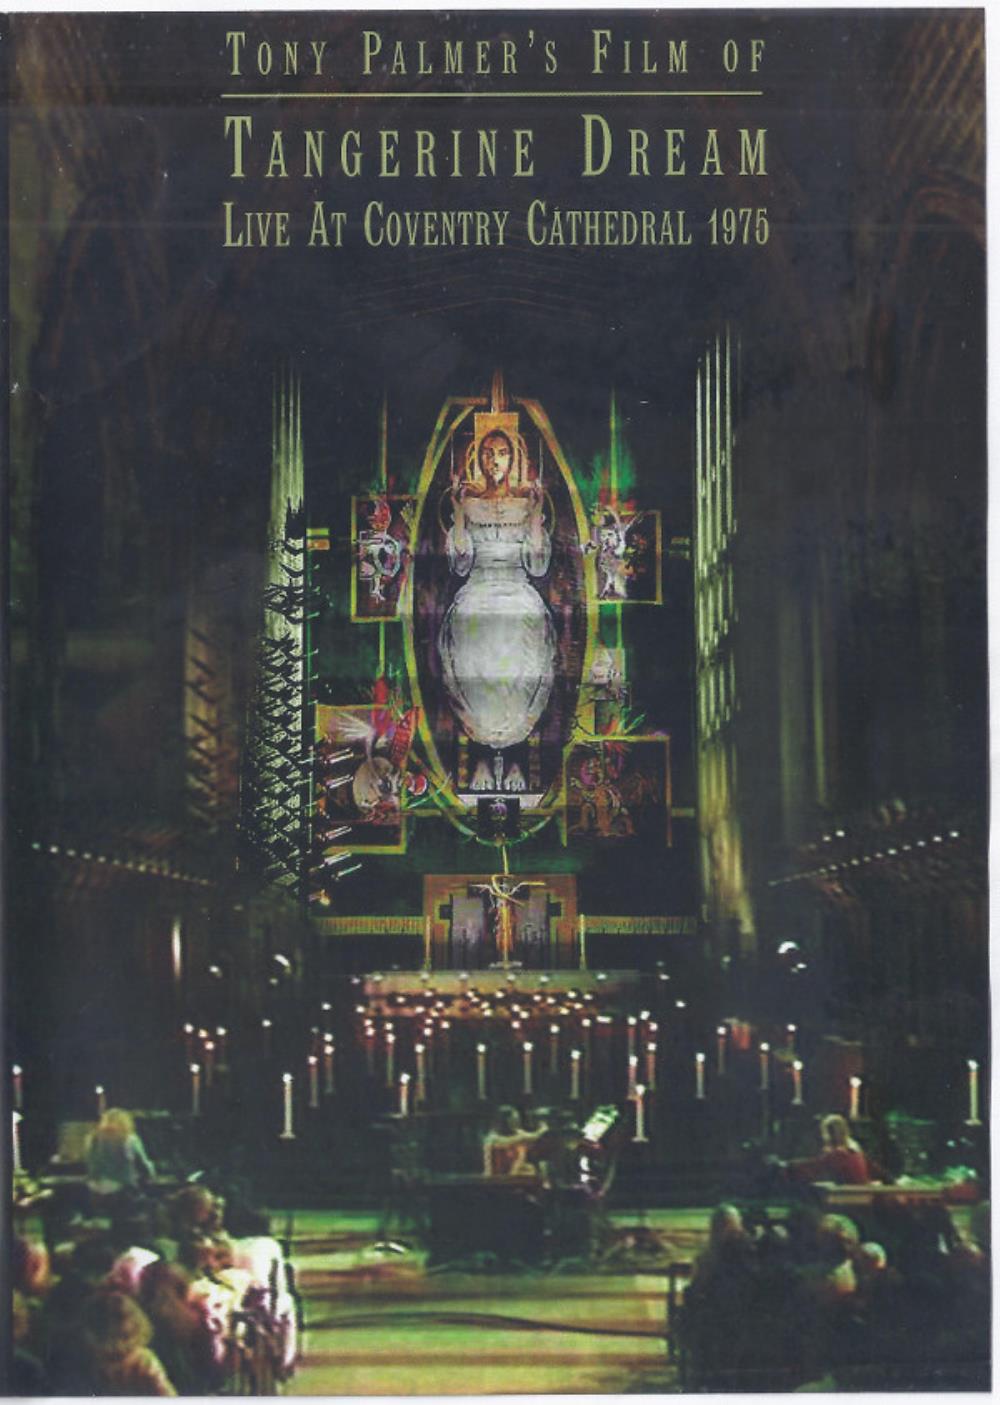 Tangerine Dream Live at Coventry Cathedral 1975 album cover